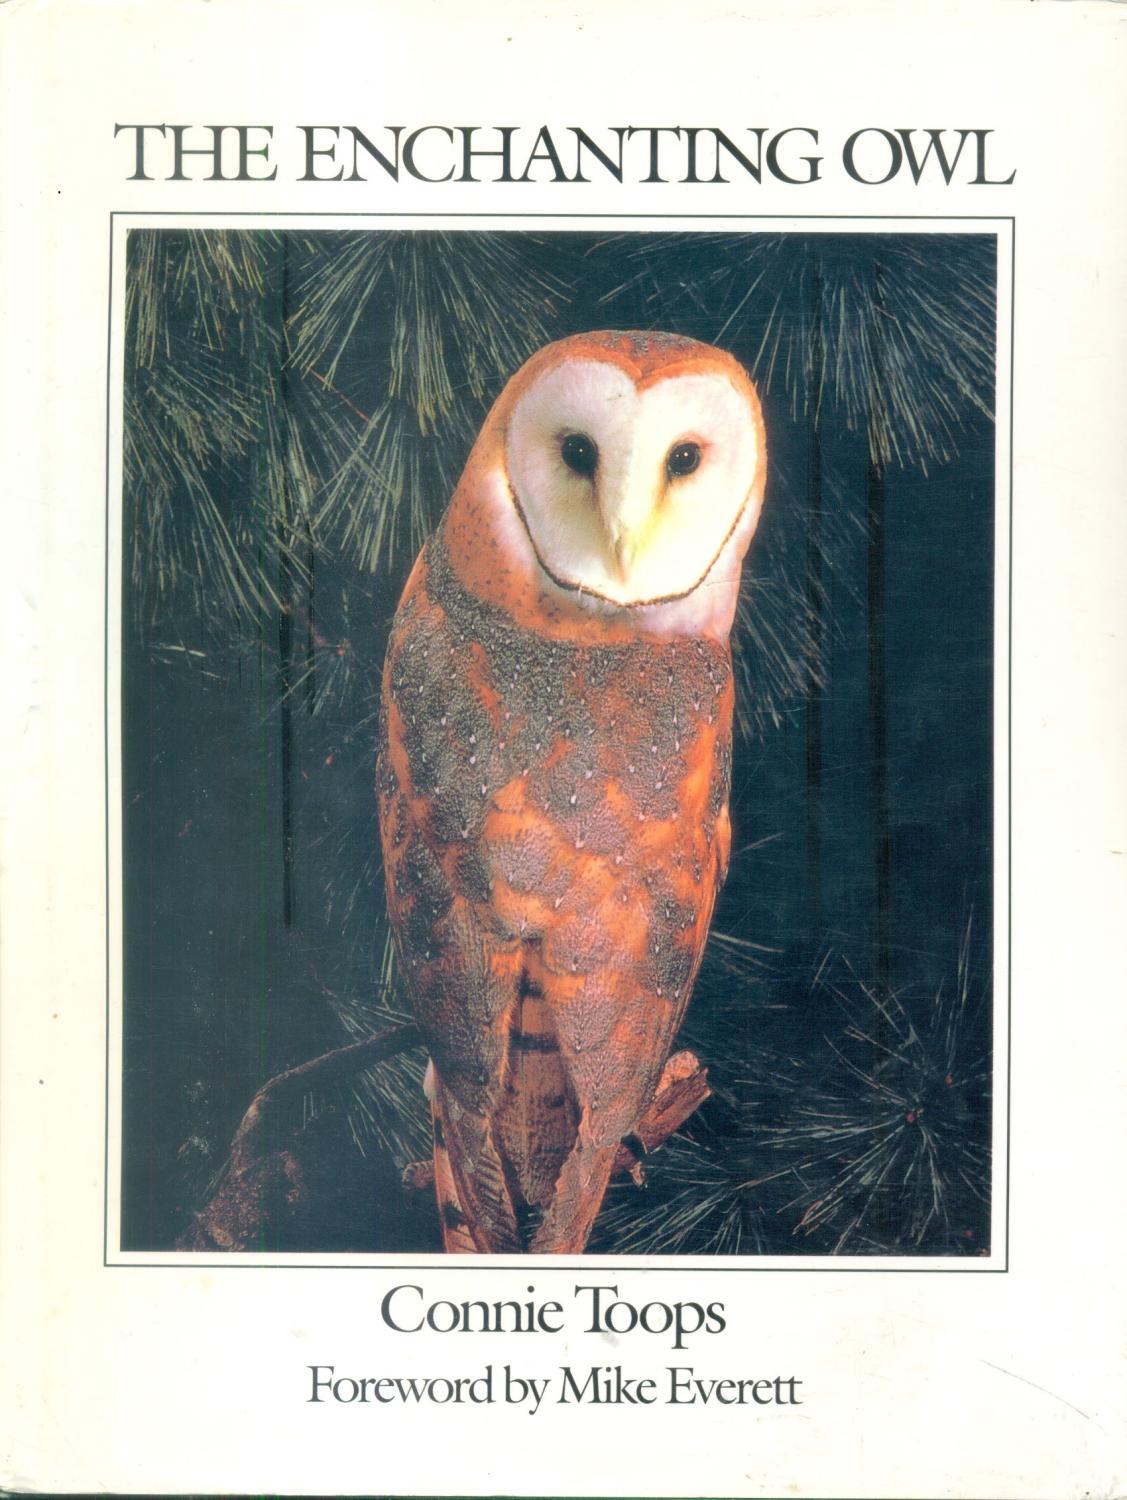 The Enchanting Owl - Connie Toops